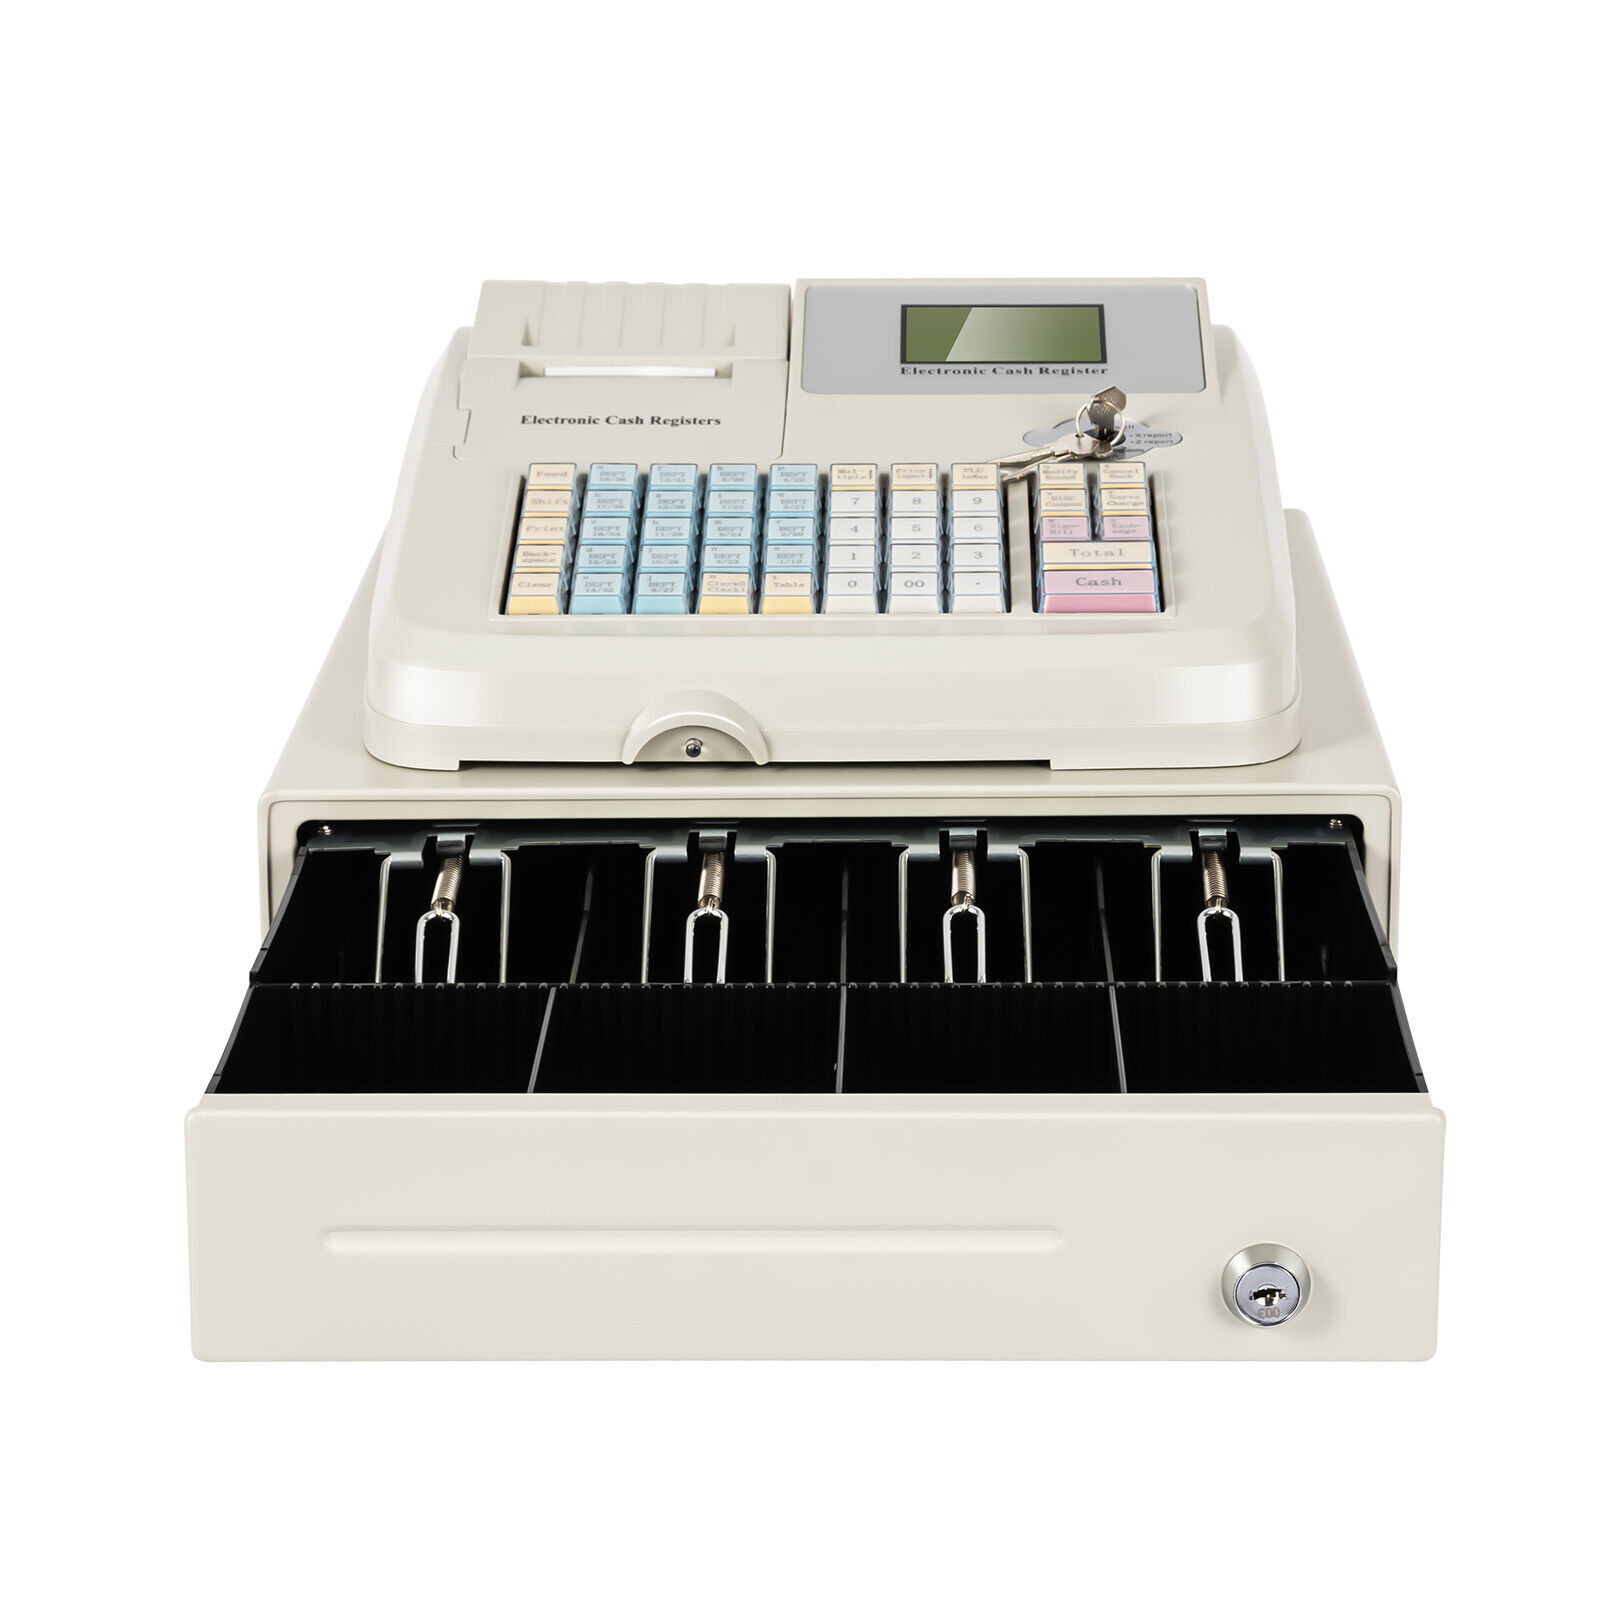 New Digital LED Cash Register with Drawer 48 Keys for Retail Restaurant POS SALE TBvechi Does Not Apply - фотография #7